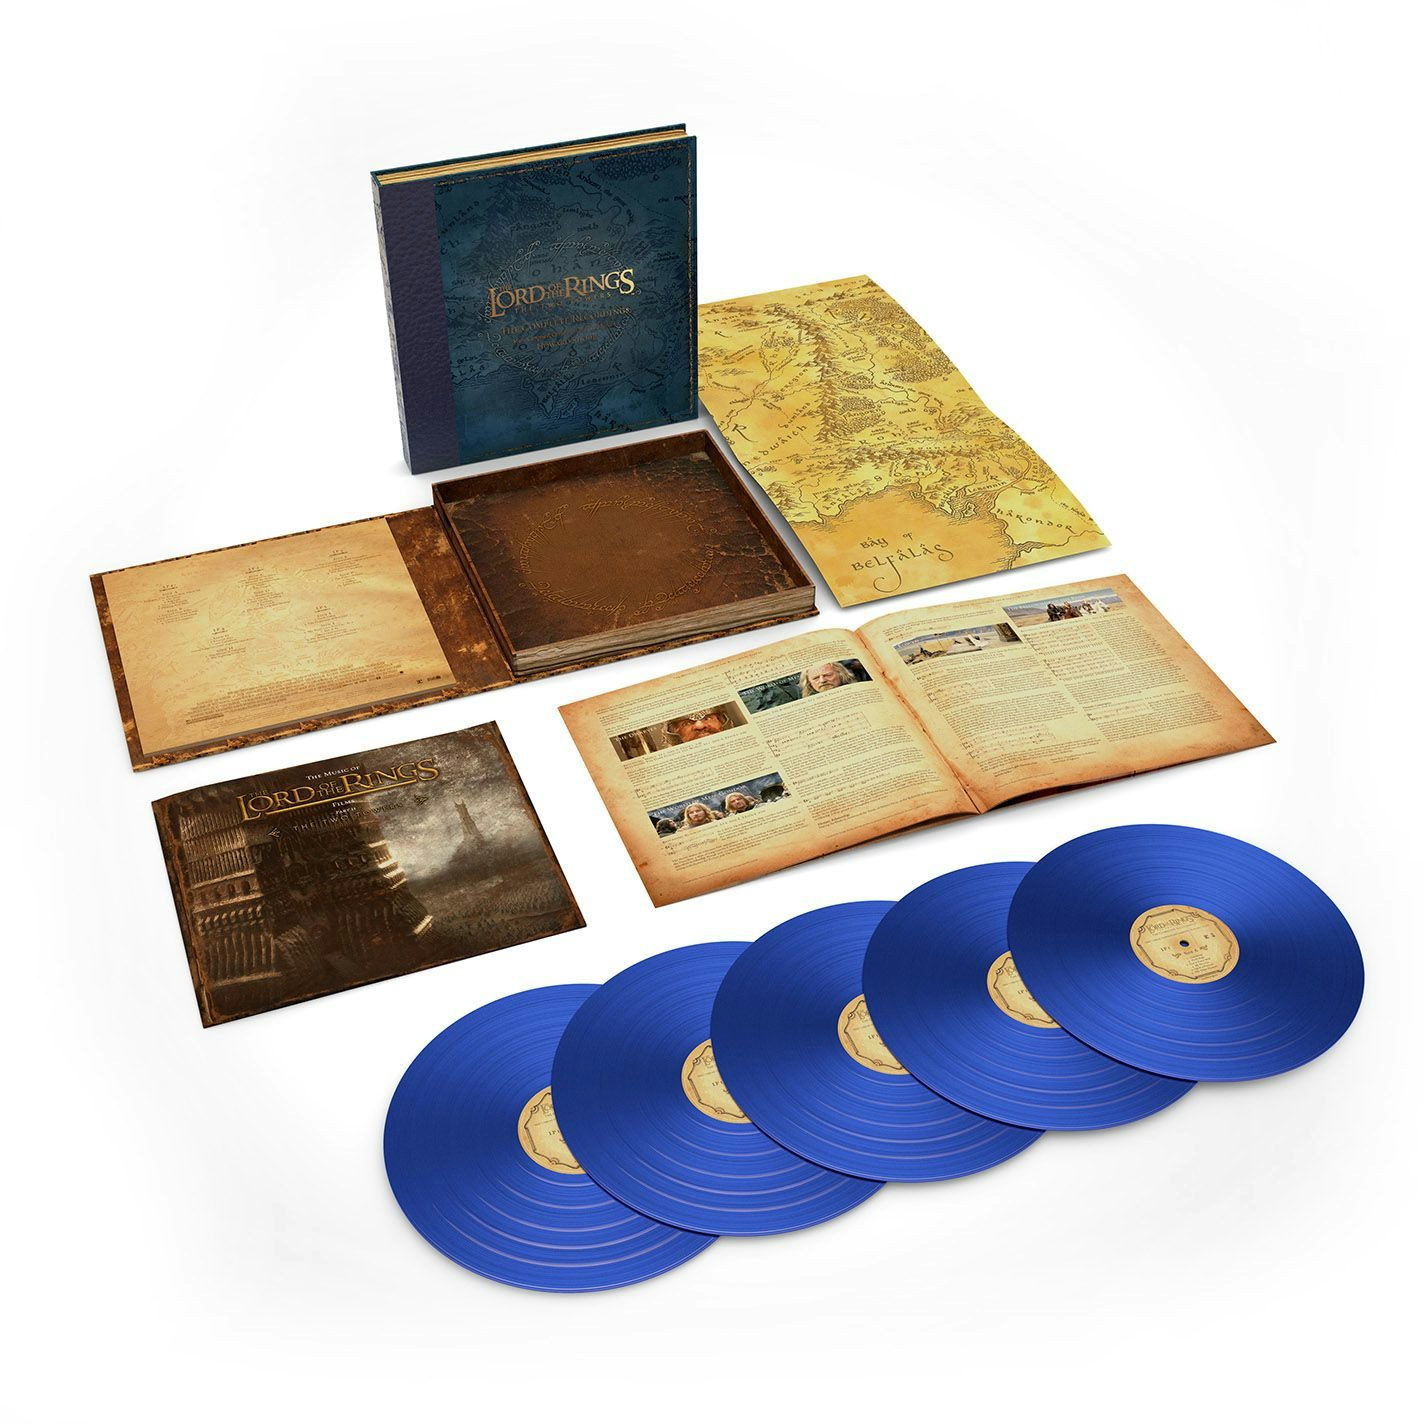 Howard Shore LORD OF THE RINGS: THE TWO TOWERS - COMPLETE Box Set